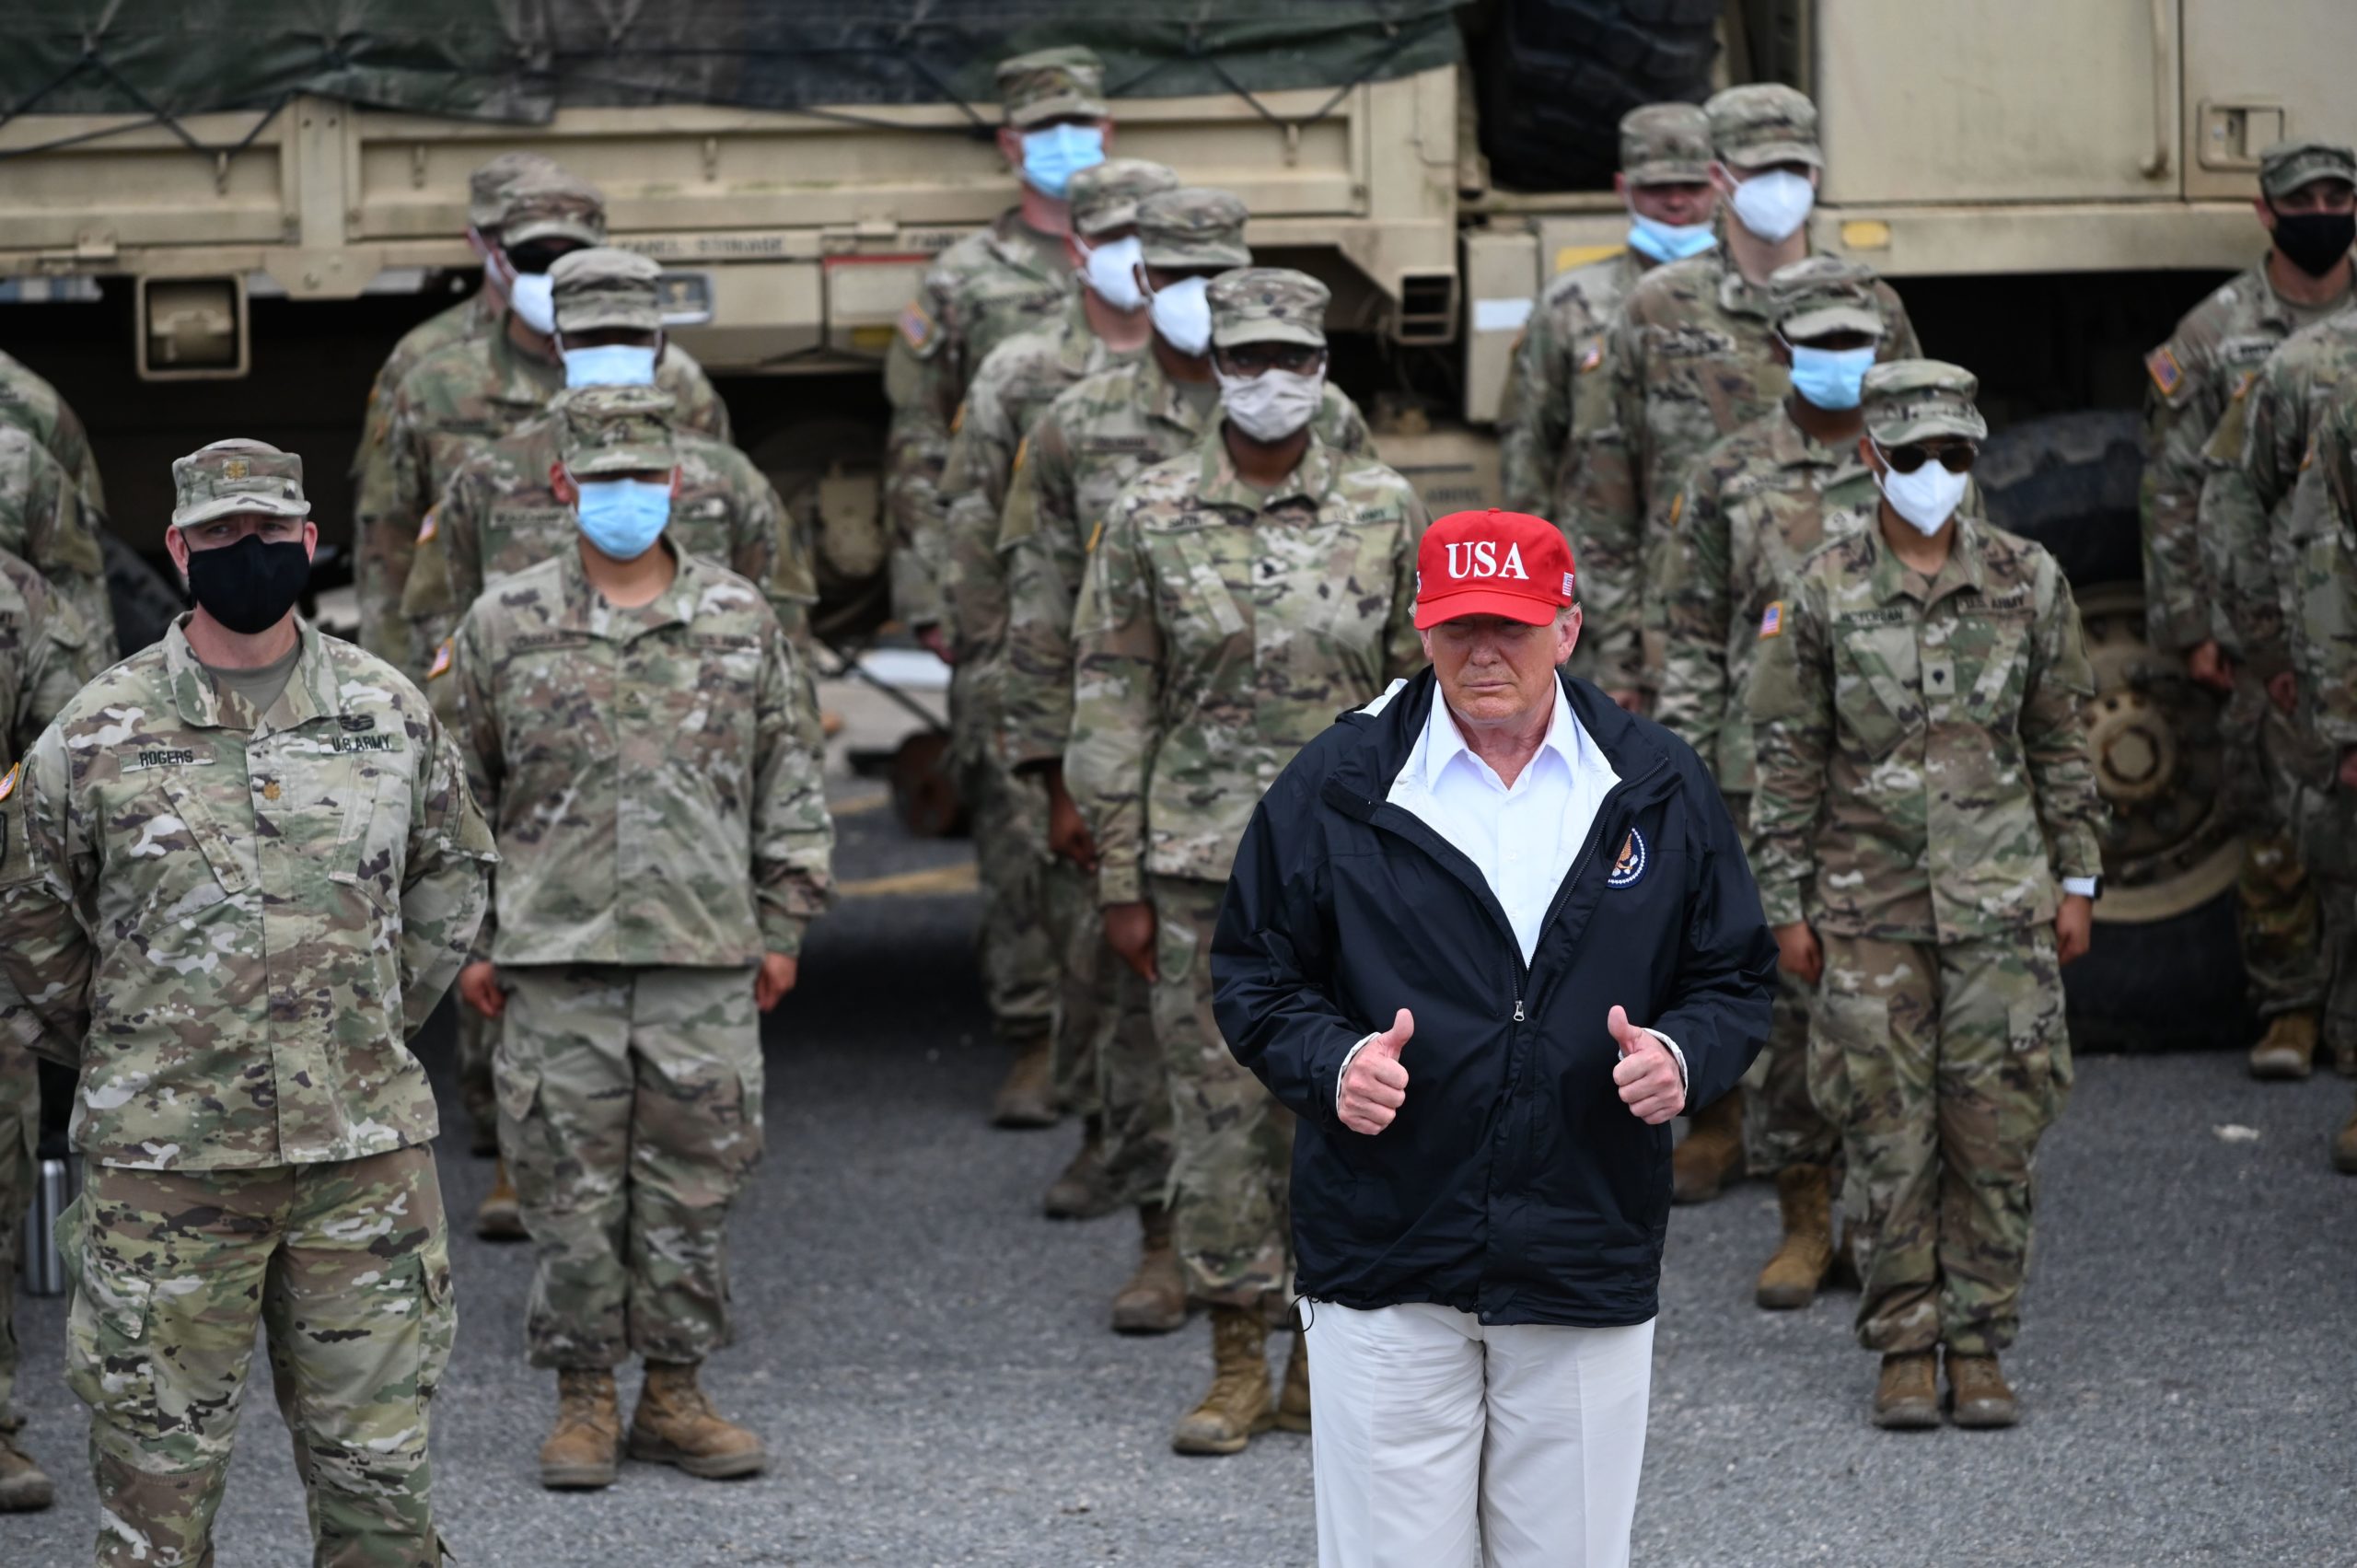 US President Donald Trump poses with National Guard troops in Lake Charles, Louisiana, on August 29, 2020. Trump surveyed damage in the area caused by Hurricane Laura. - At least 15 people were killed after Laura slammed into the southern US states of Louisiana and Texas, authorities and local media said on August 28. (Photo by Roberto Schmidt/AFP via Getty Images)